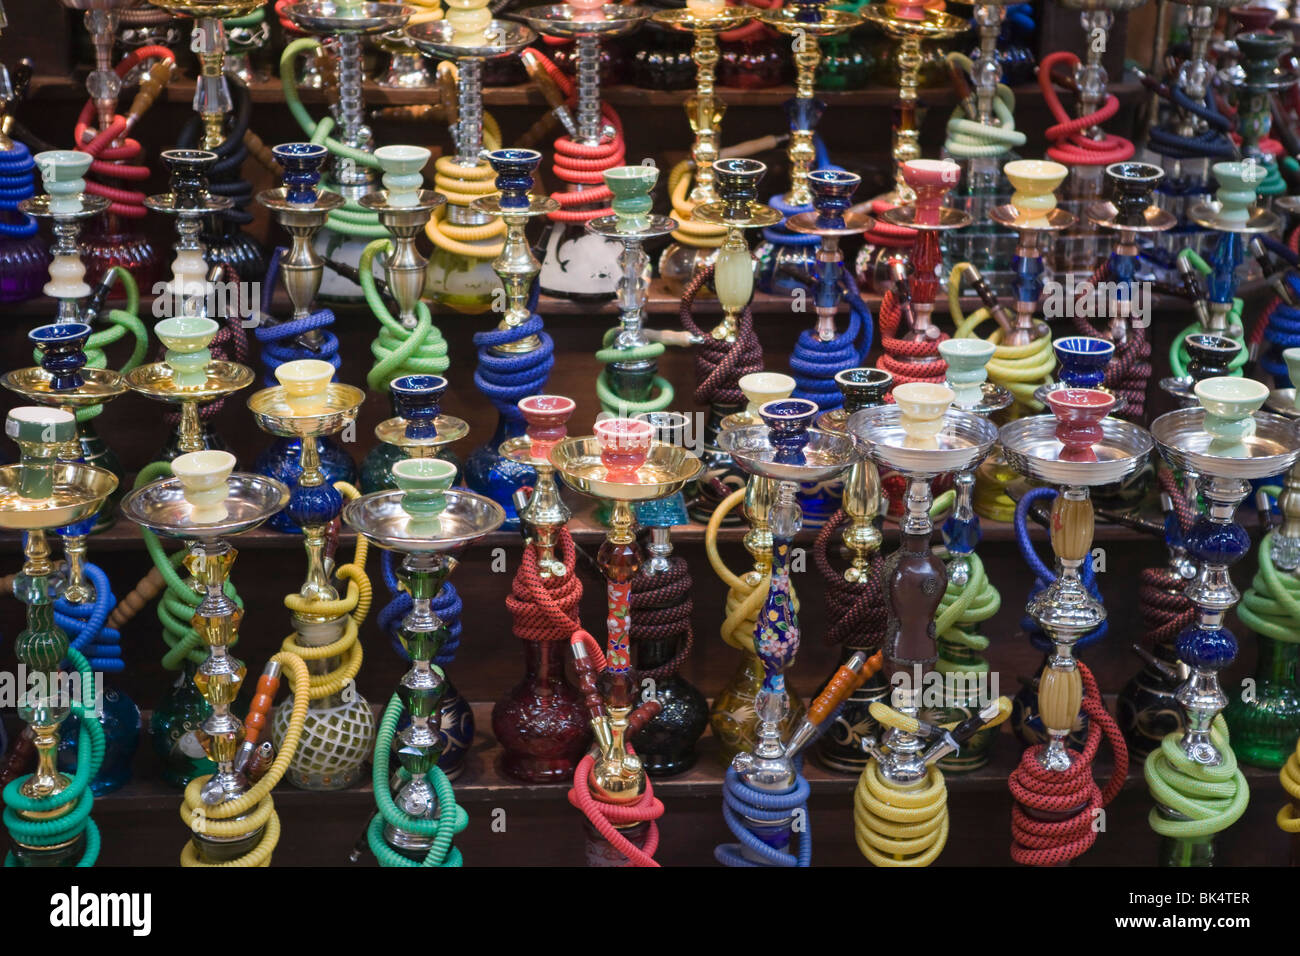 Hookah or hubble bubble pipes for sale in a souk, Dubai, United Arab Emirates, Middle East Stock Photo